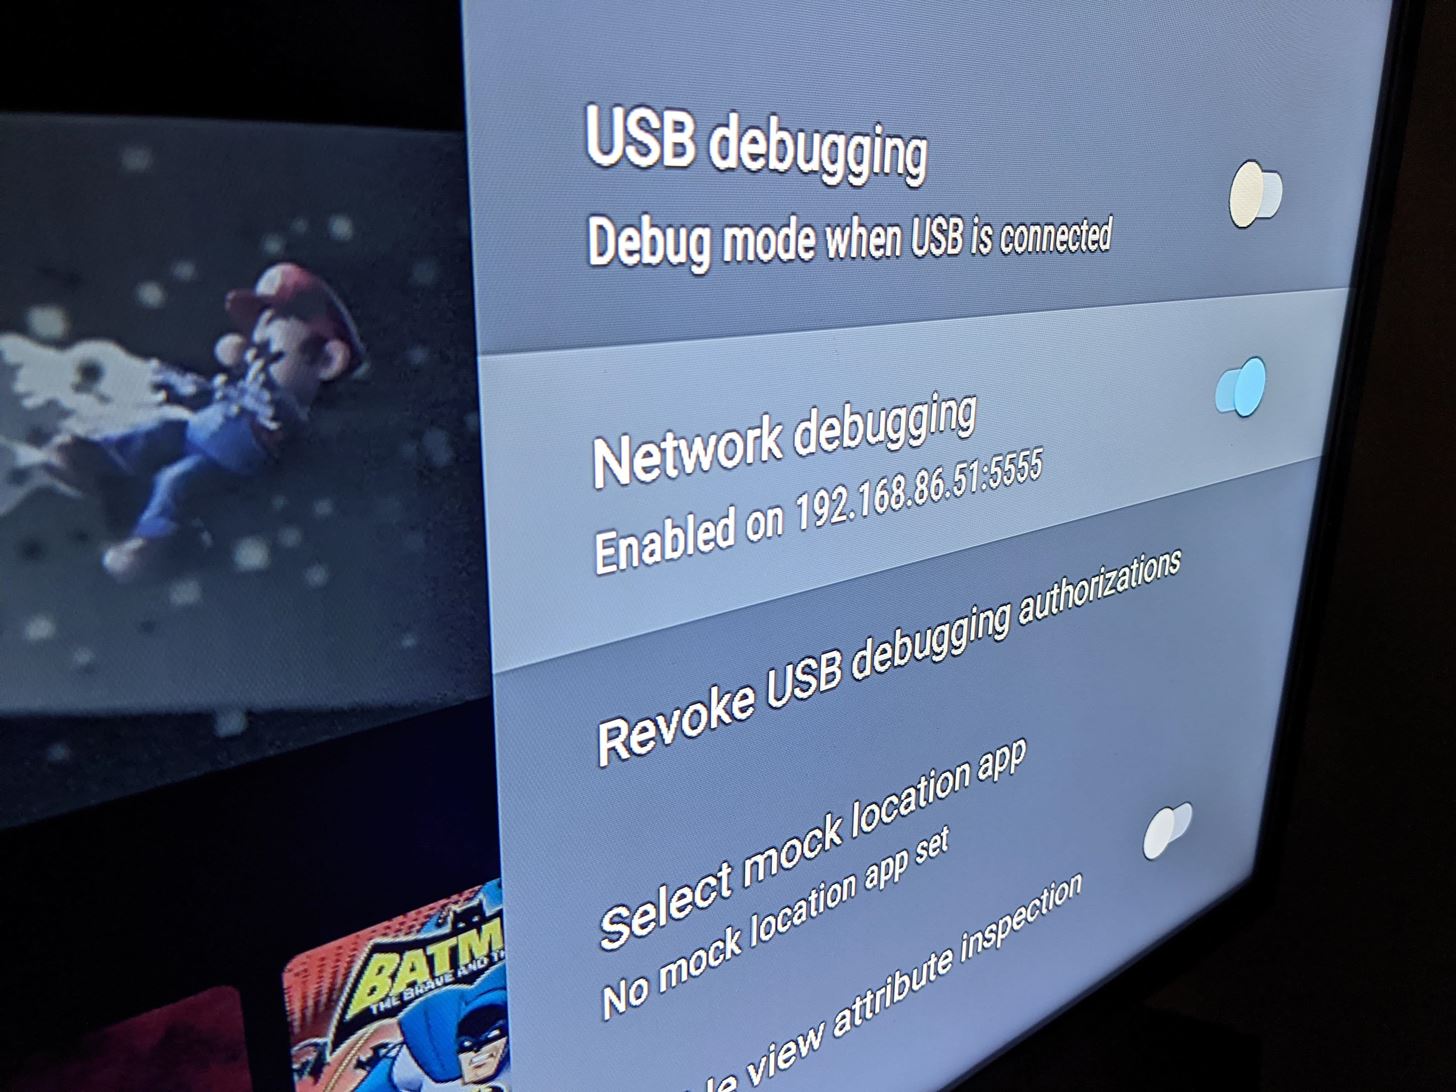 How to Get the New Google TV UI on Android TV — Nvidia Shield, Mi Box, Sony & More